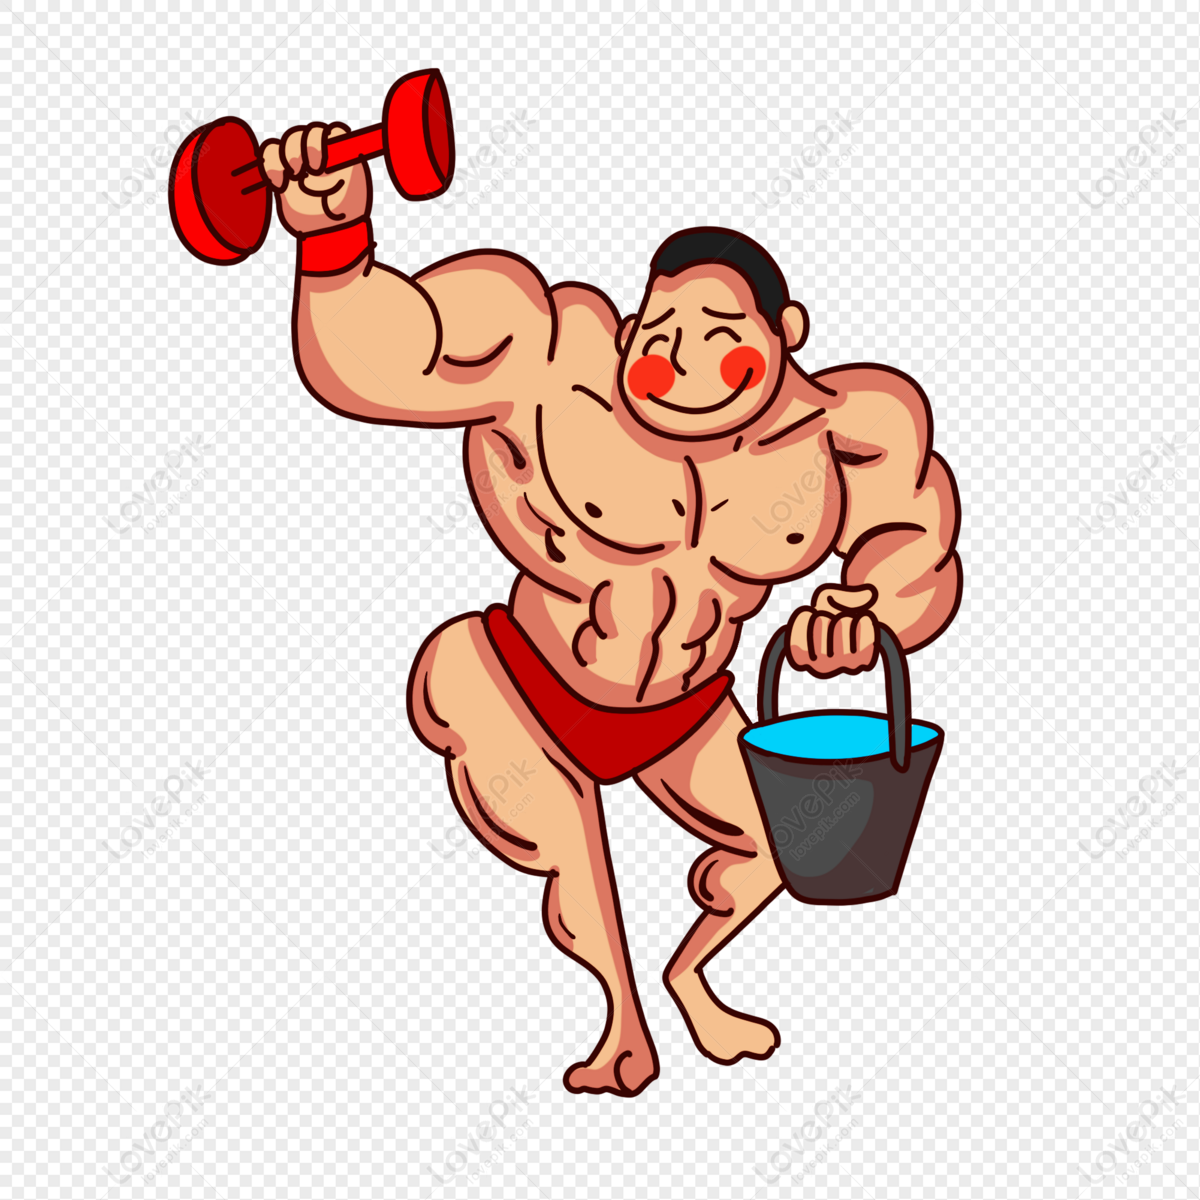 Cartoon Muscular Man Picture PNG Transparent Background And Clipart Image  For Free Download - Lovepik | 401460100